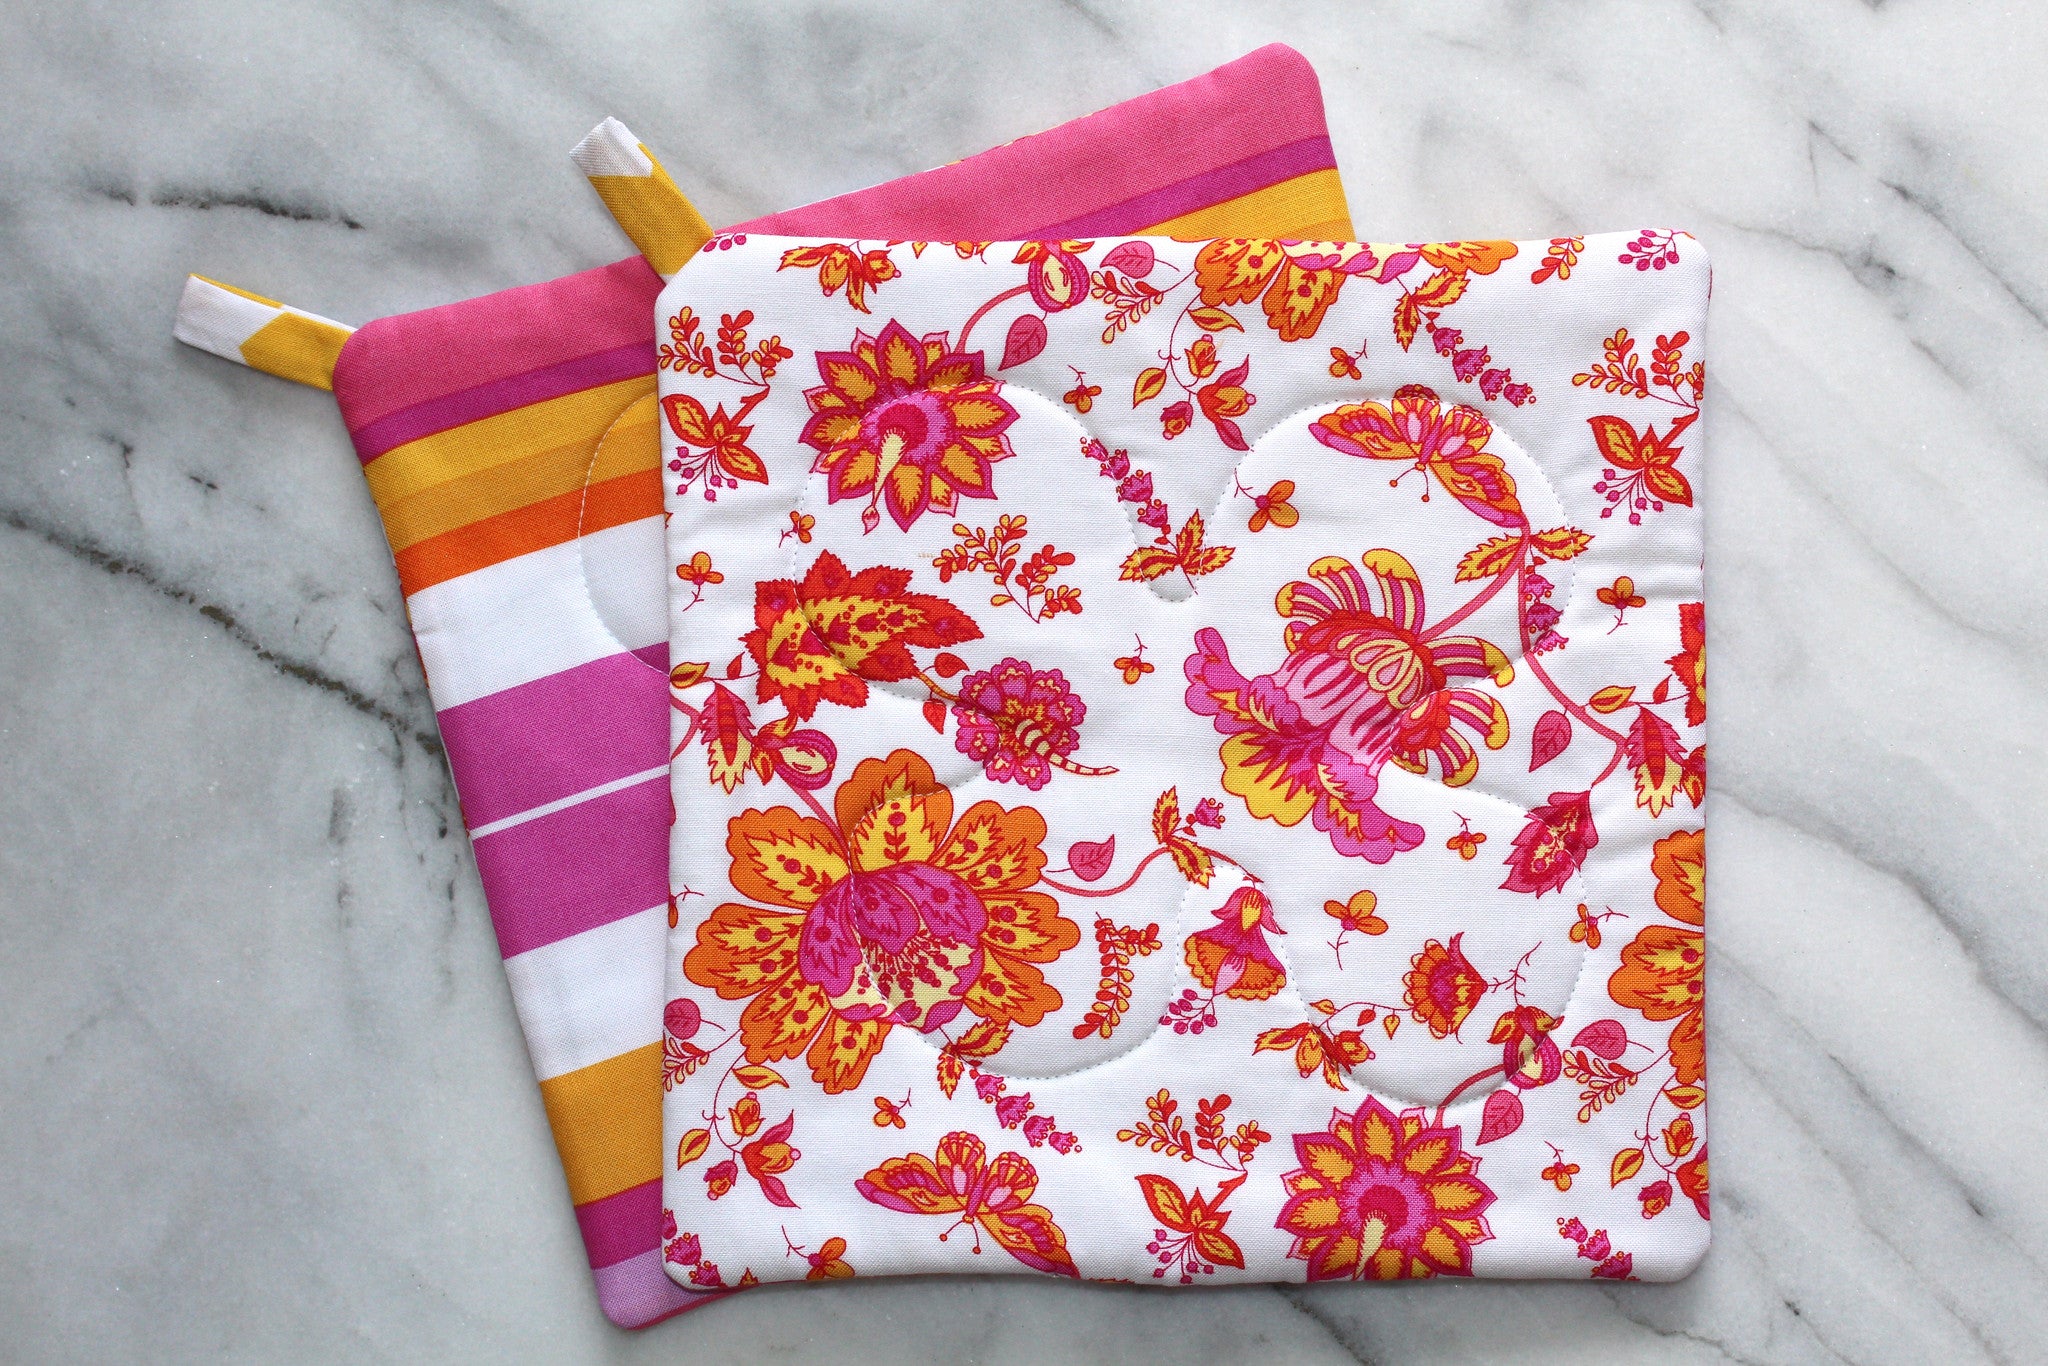 Summer Soiree Potholder - Jacobian Flower-The Blue Peony-Category_Pot Holder,Color_Orange,Color_Pink,Color_Yellow,Department_Kitchen,Pattern_Floral,Pattern_Graphic,Pattern_Stripes,Size_Traditional (Square),Theme_Summer